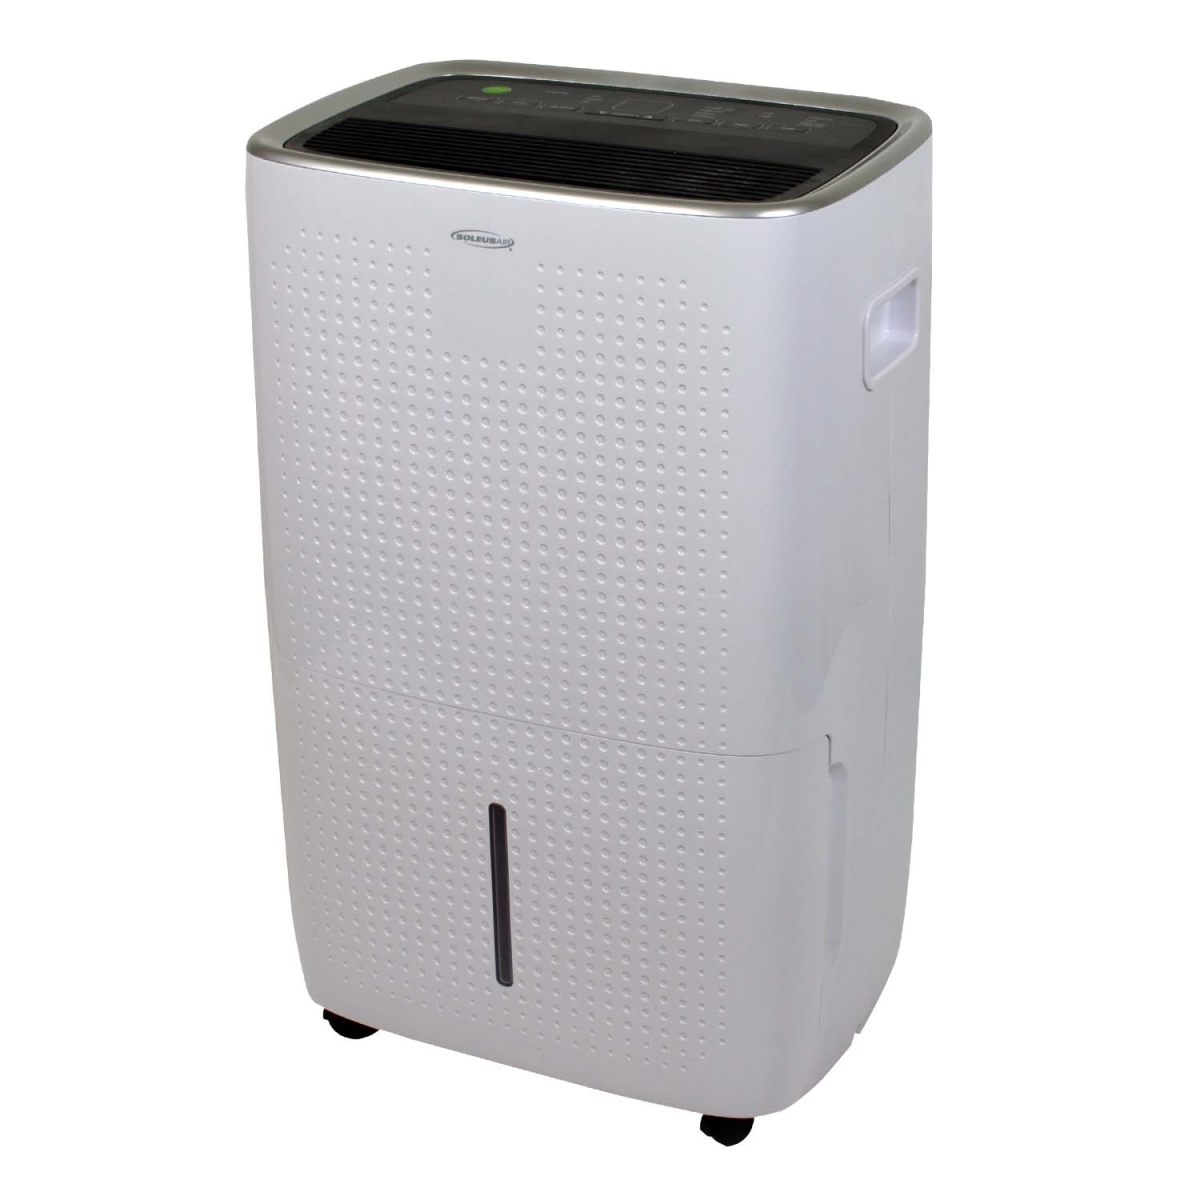 Picture of Soleus Air DSJ-50E-01 50 Pints Dehumidifier with Mirage Display